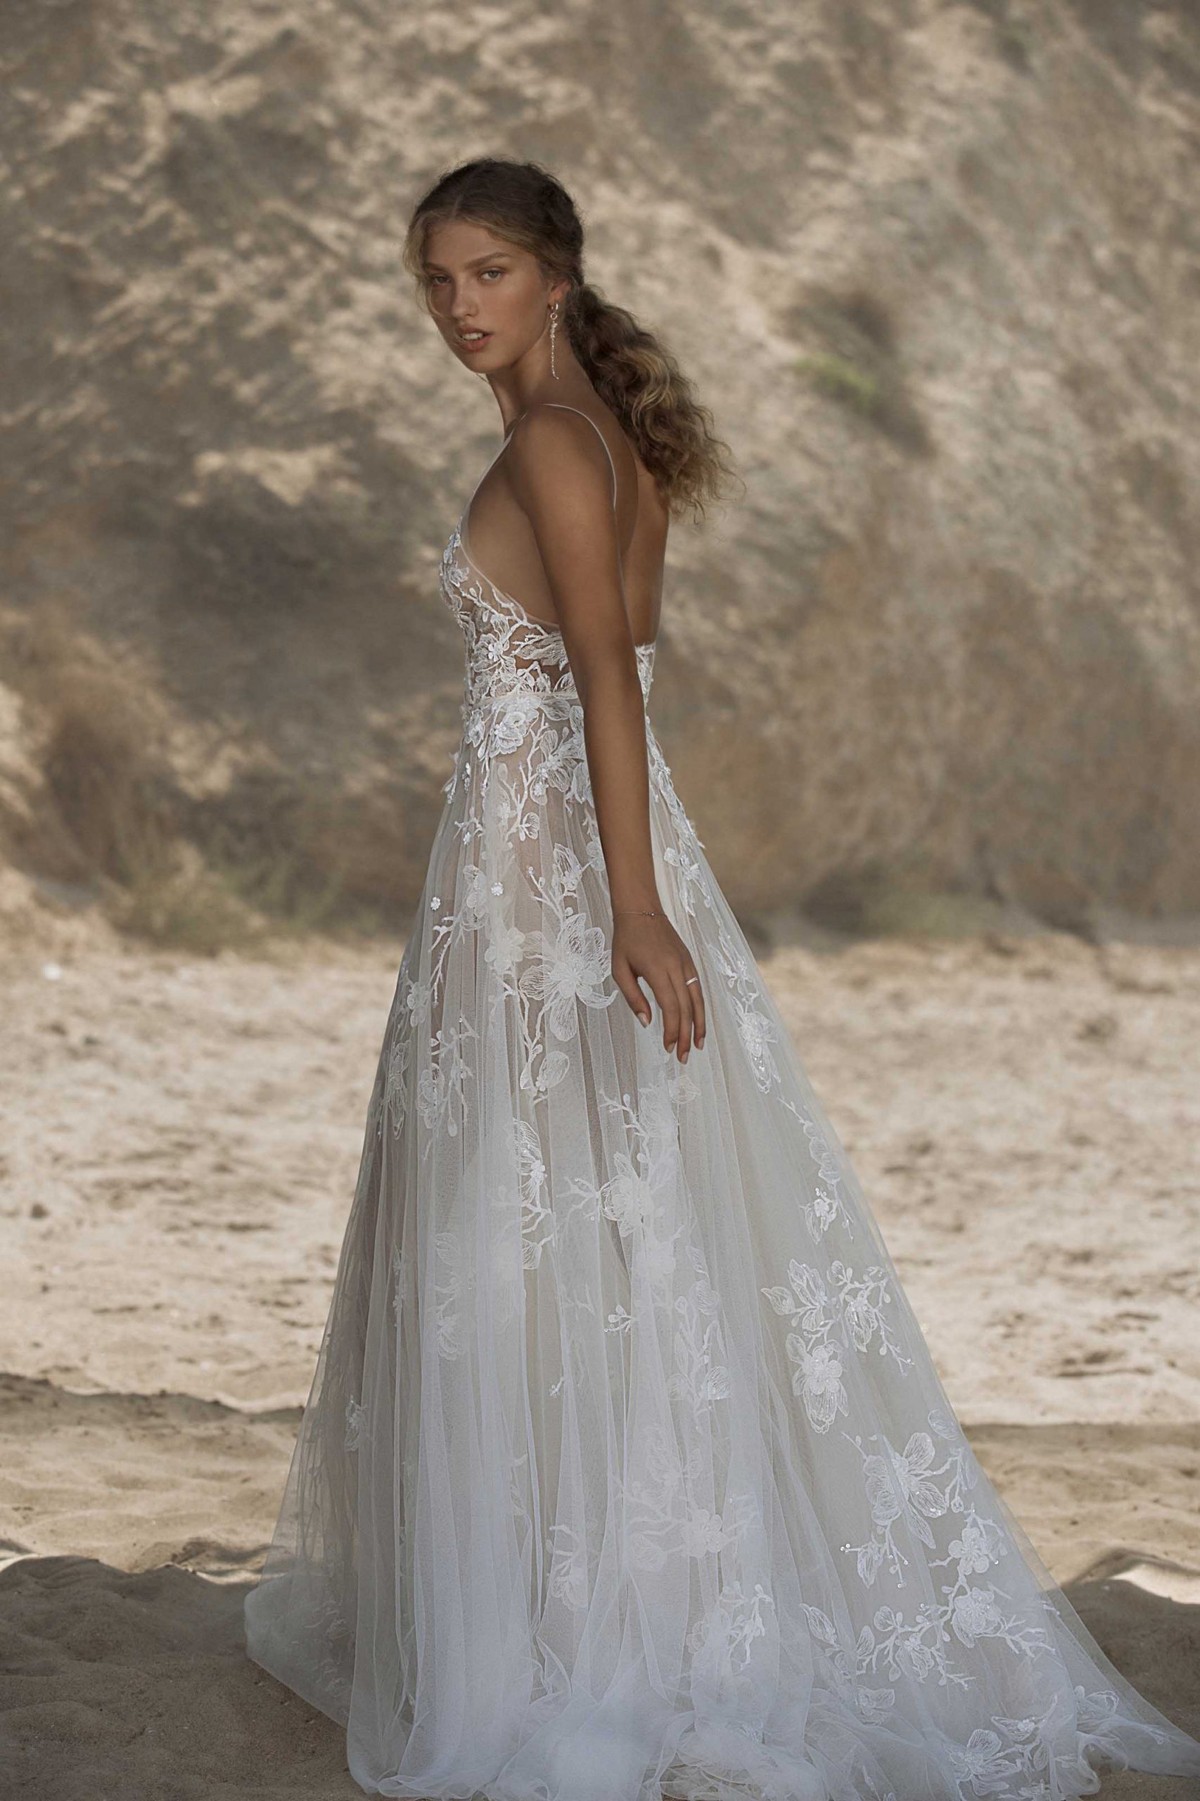 21-HELENA Bridal Dress Inspirated By Berta Muse 2021 Vista Mare Collection